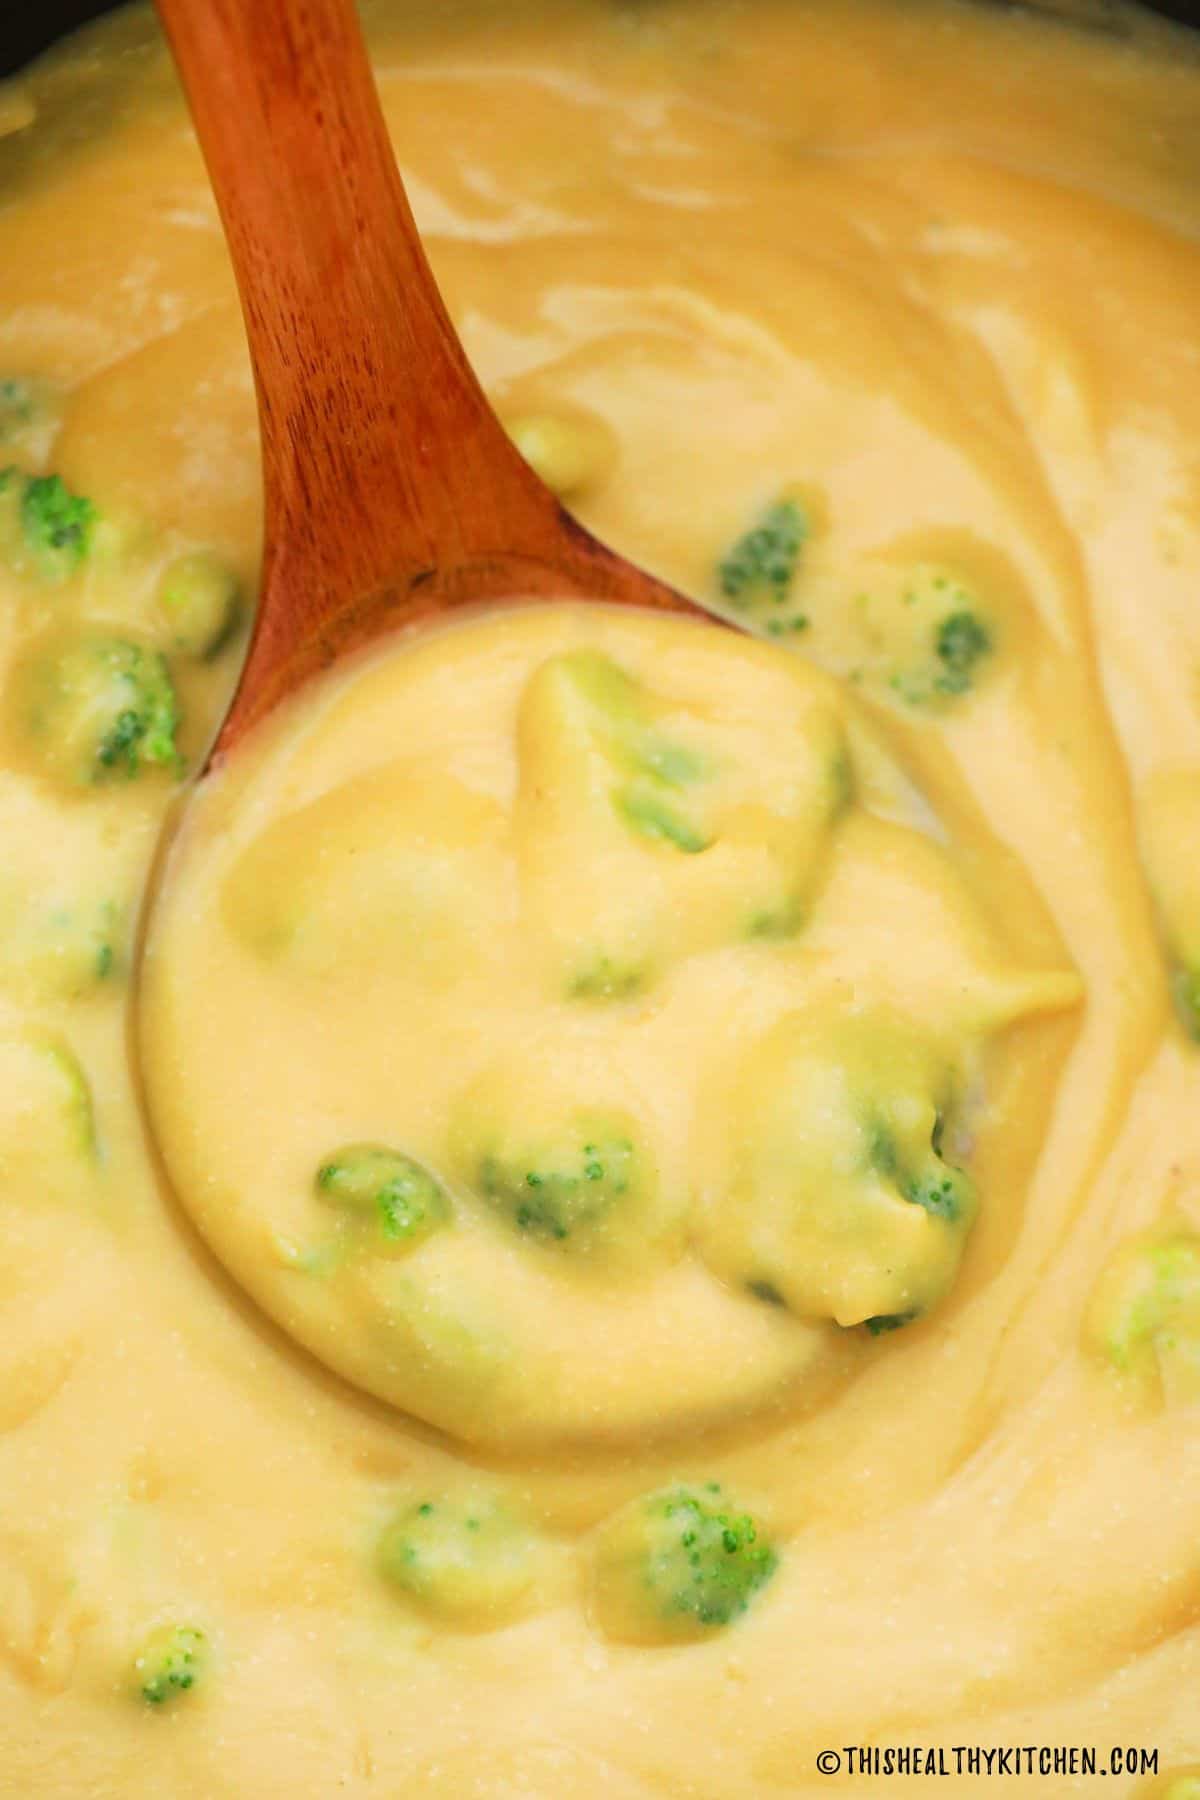 Ladle of creamy soup with broccoli pieces inside pot.